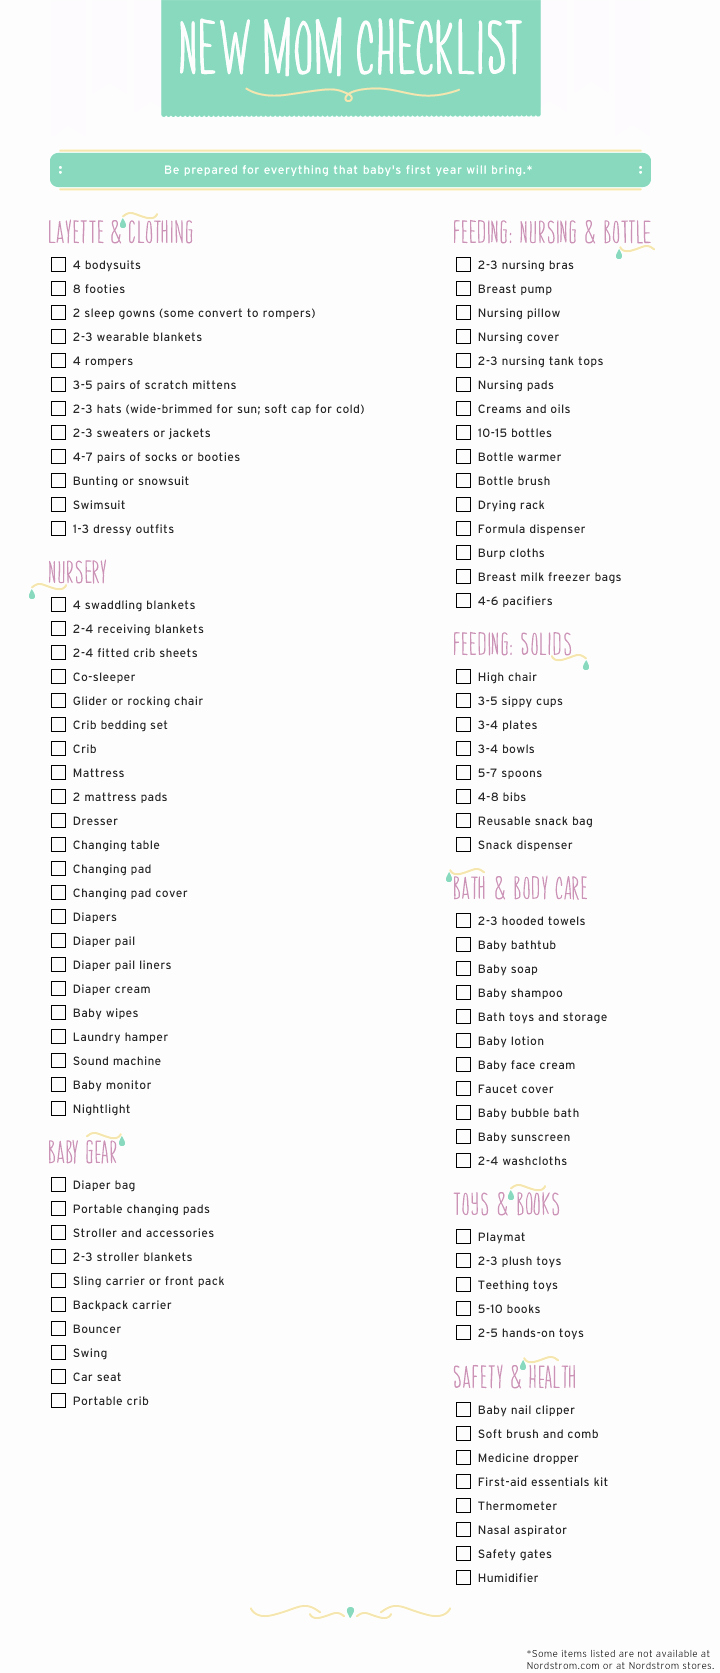 Newborn Essentials Checklist Awesome Printable New Mom Checklist From nordstrom Baby ♥